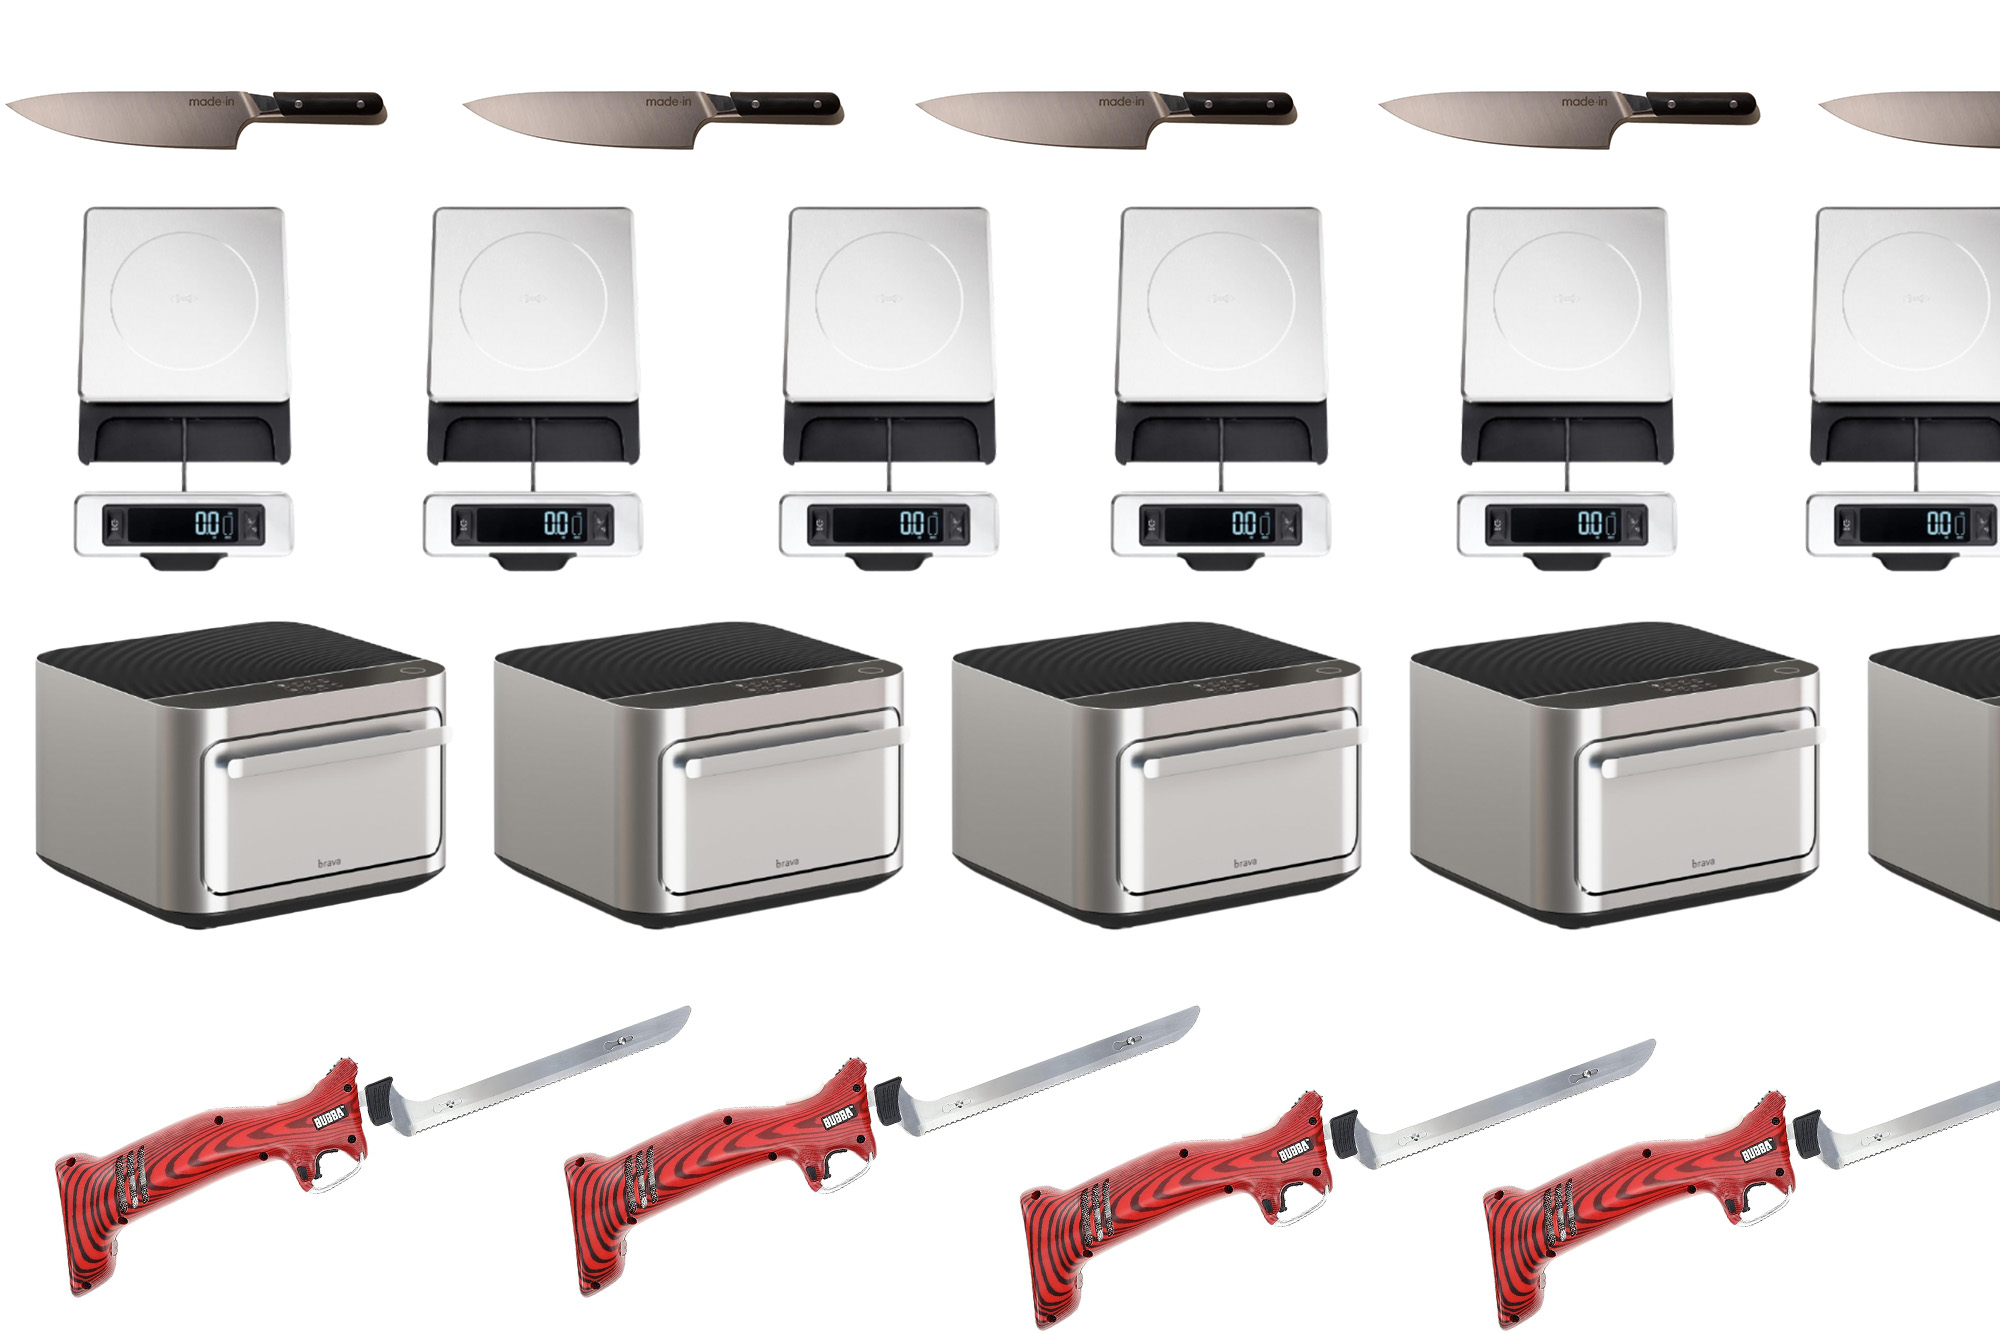 Four different kinds of kitchen gadgets on a plain background